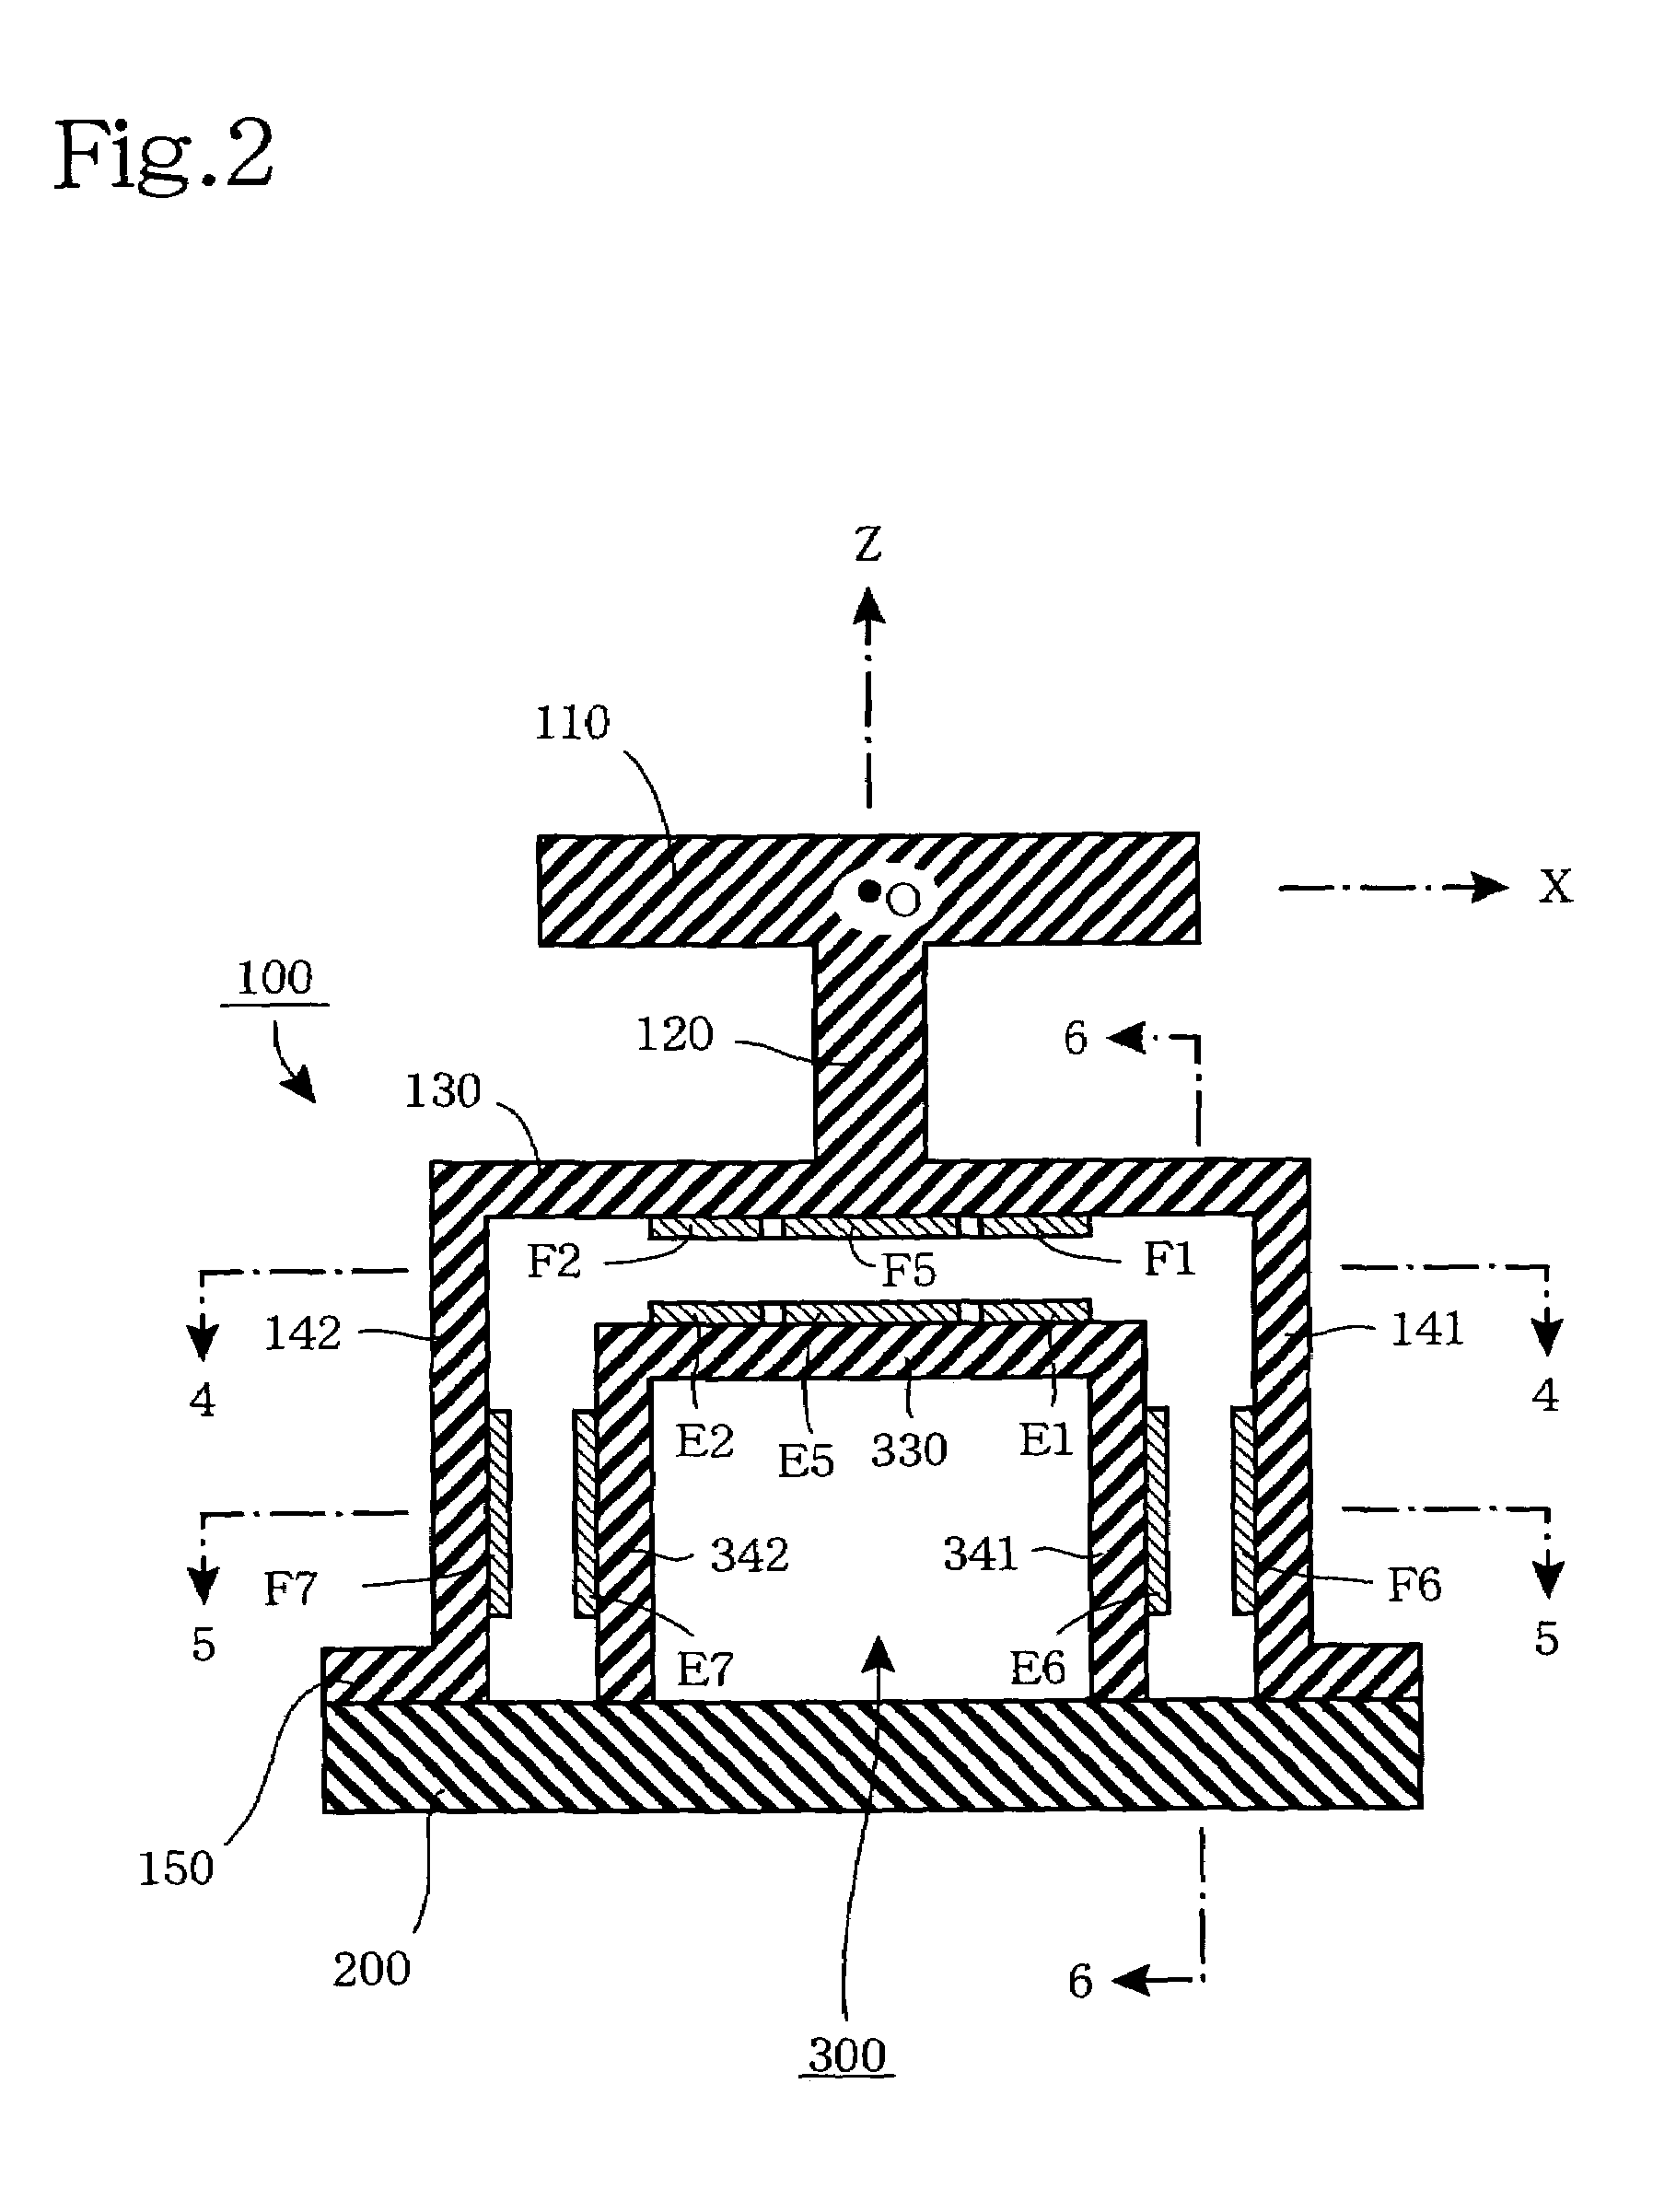 Force detection device